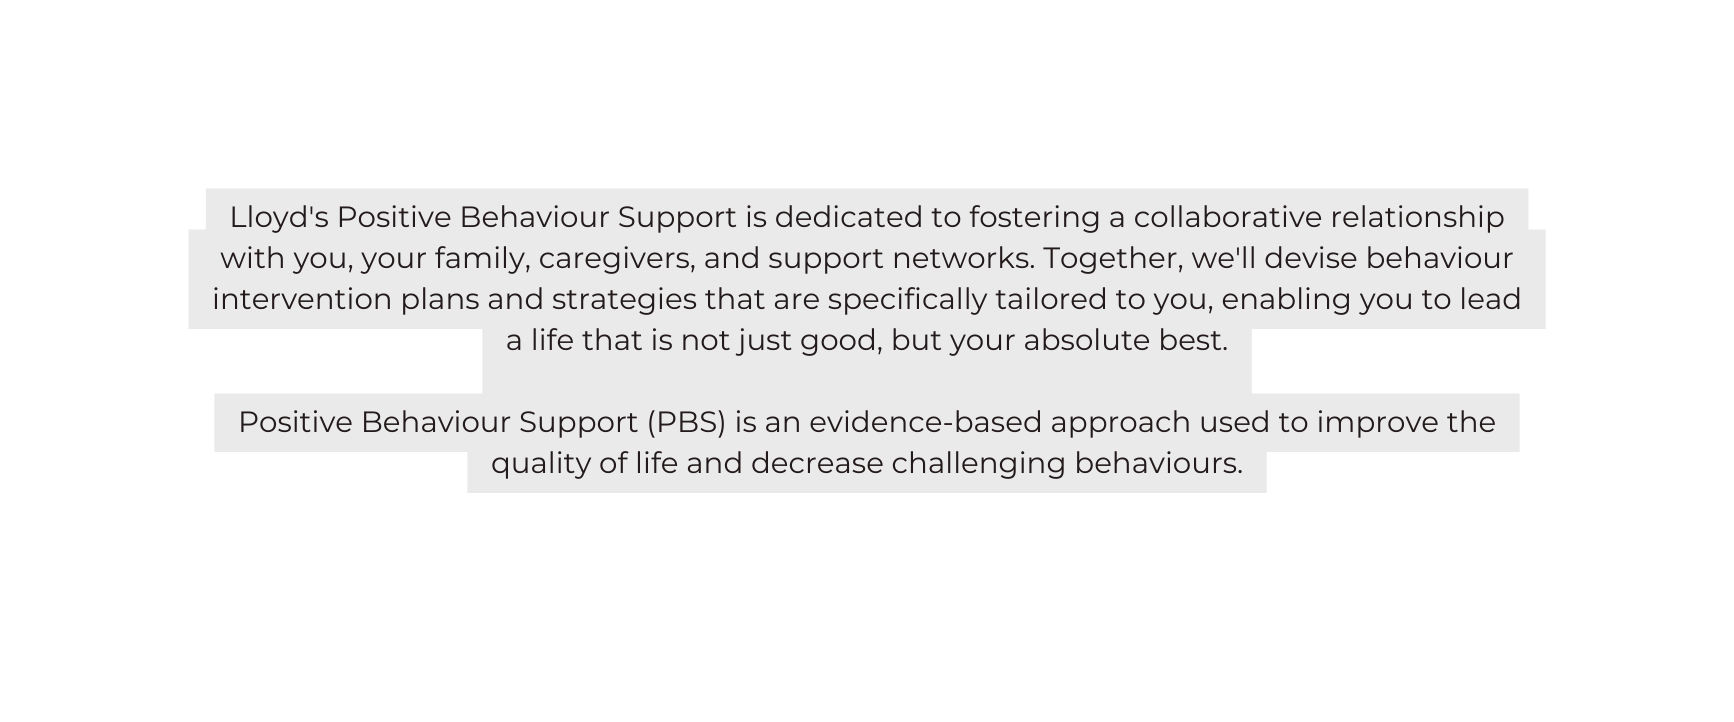 Lloyd s Positive Behaviour Support is dedicated to fostering a collaborative relationship with you your family caregivers and support networks Together we ll devise behaviour intervention plans and strategies that are specifically tailored to you enabling you to lead a life that is not just good but your absolute best Positive Behaviour Support PBS is an evidence based approach used to improve the quality of life and decrease challenging behaviours